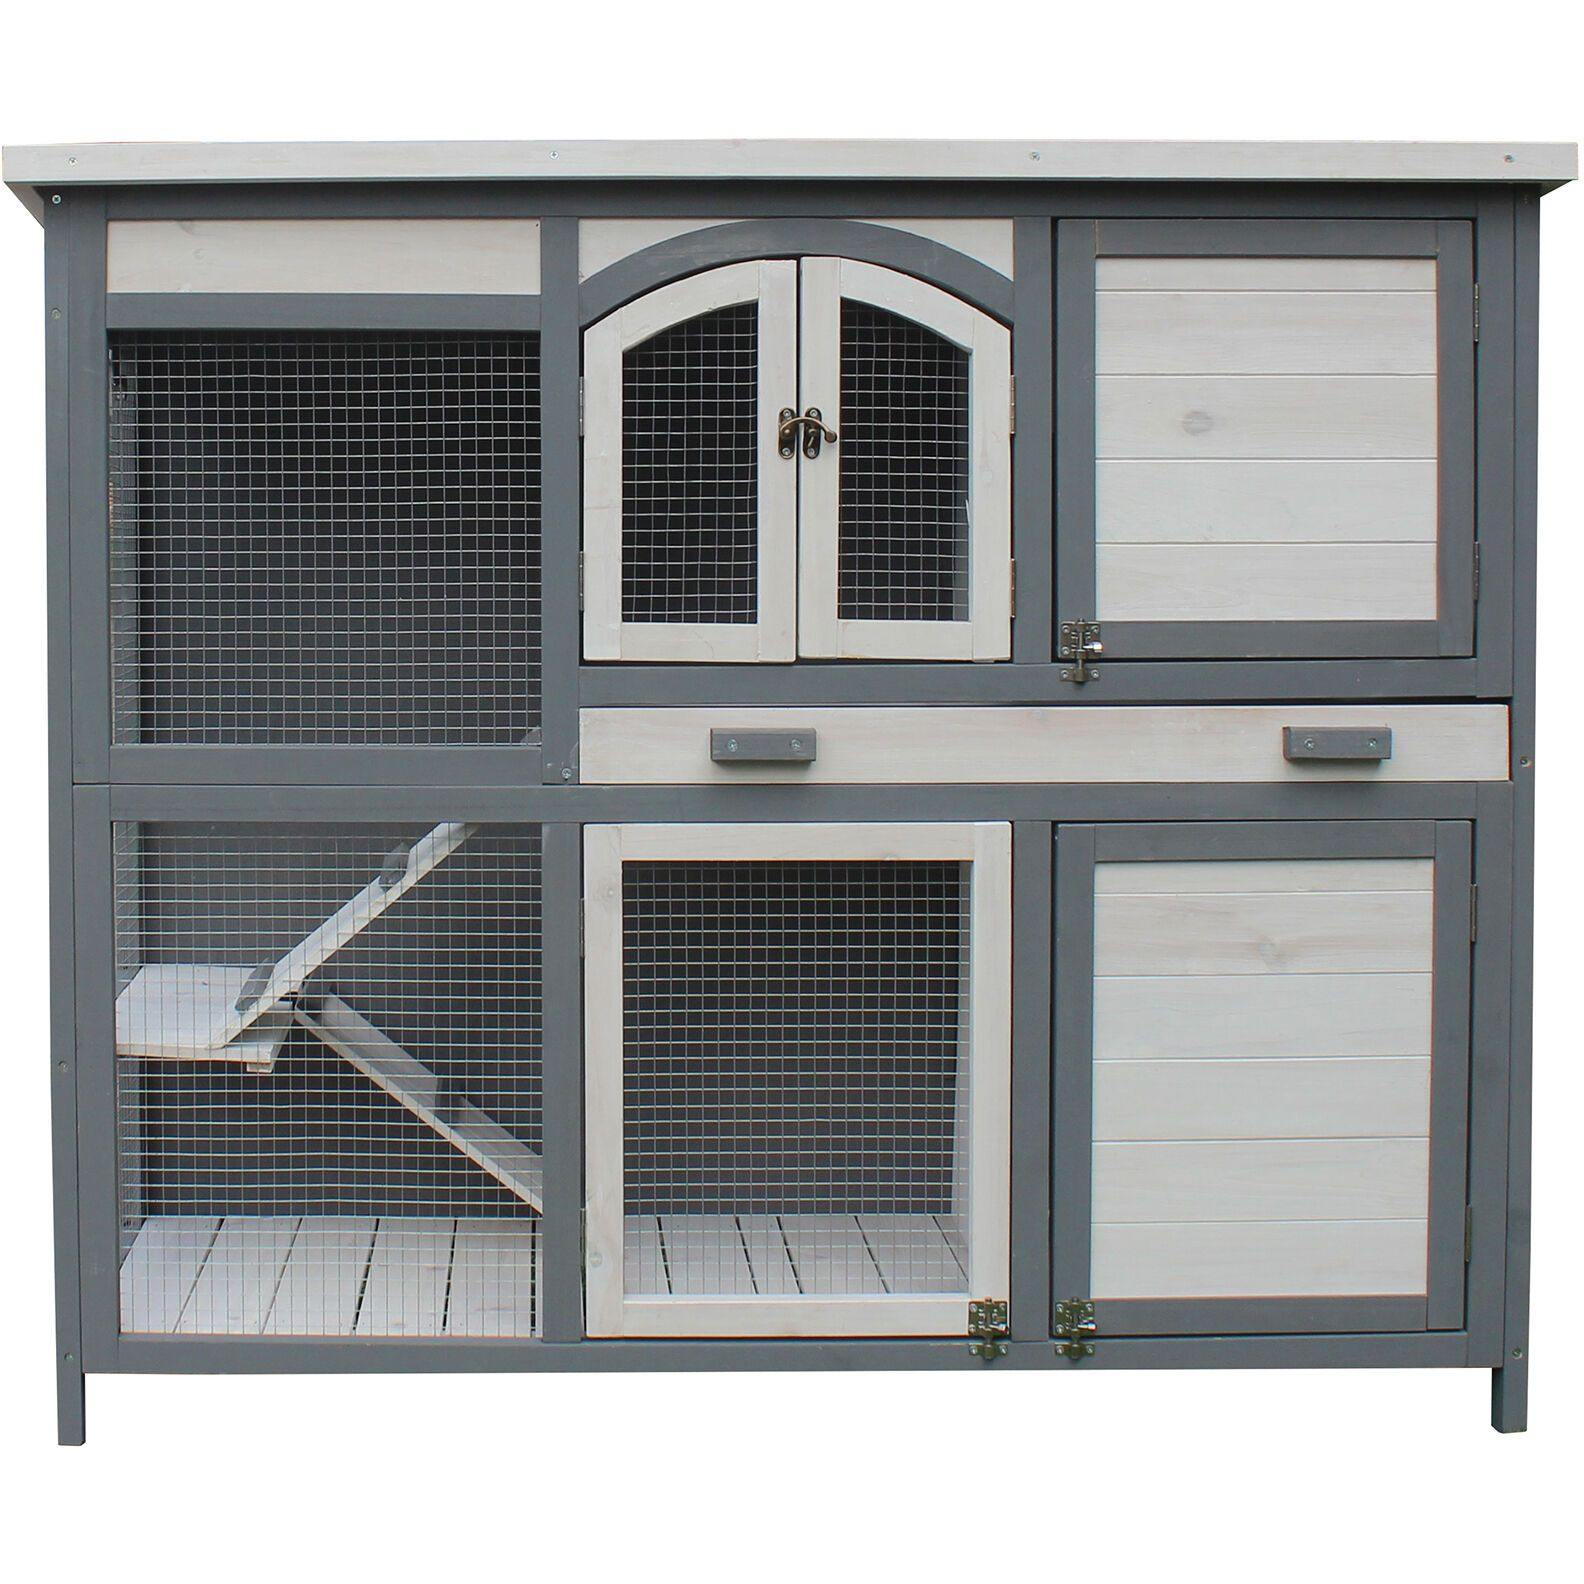 Hanover Hanover Outdoor Wooden 2-Story Rabbit Hutch with 2 Ramps, Wire Mesh Run and Removable Tray 4 Ft. W x 1.6 Ft. D x 3.4 Ft. H